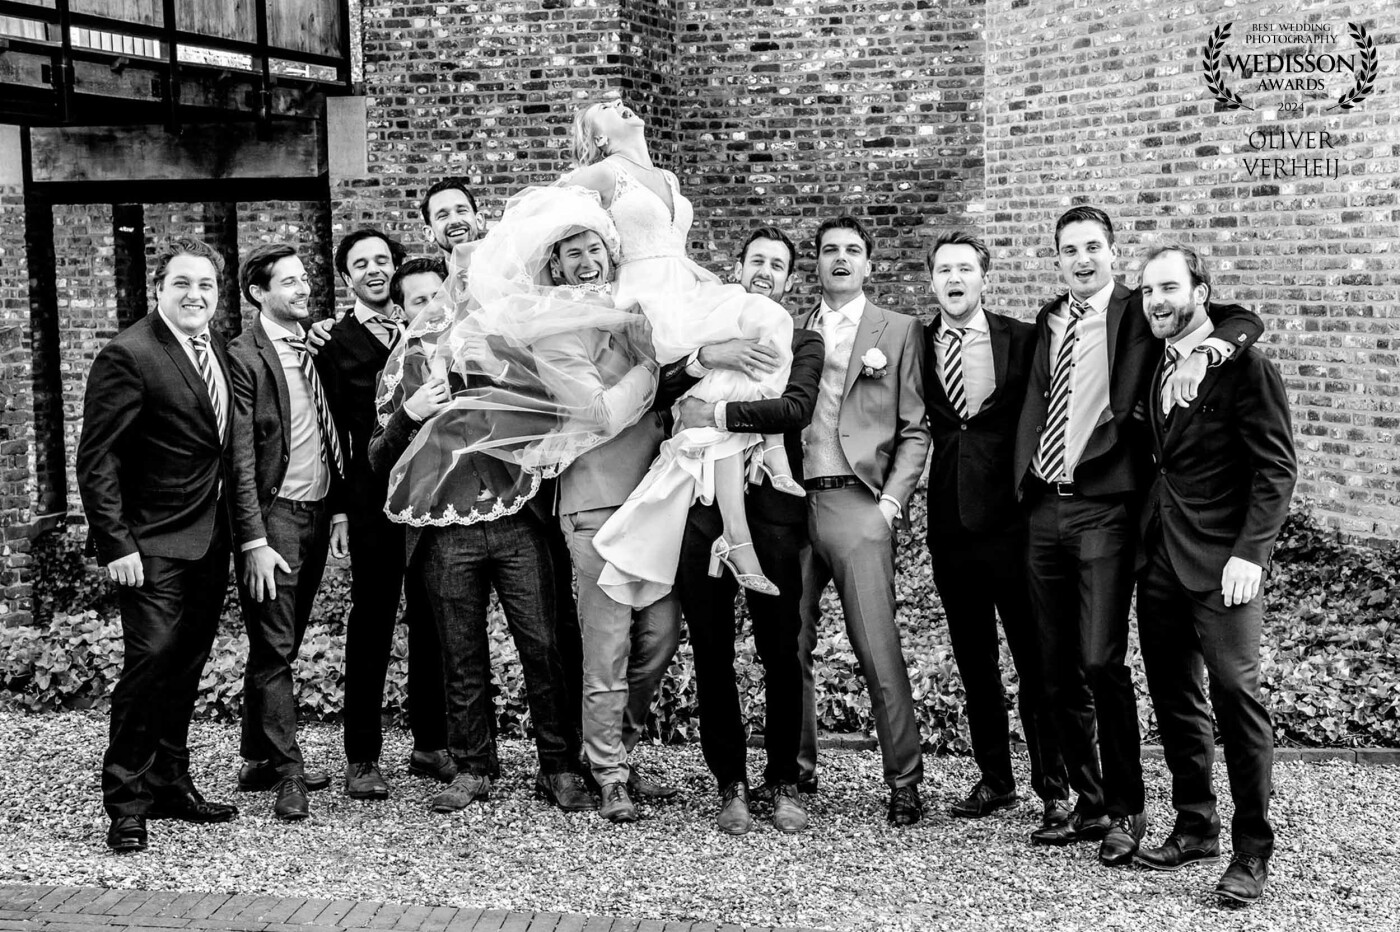 This beautiful bride is having the time of her live during the making of these group photos. She loves being carried by all those men, and it shows!